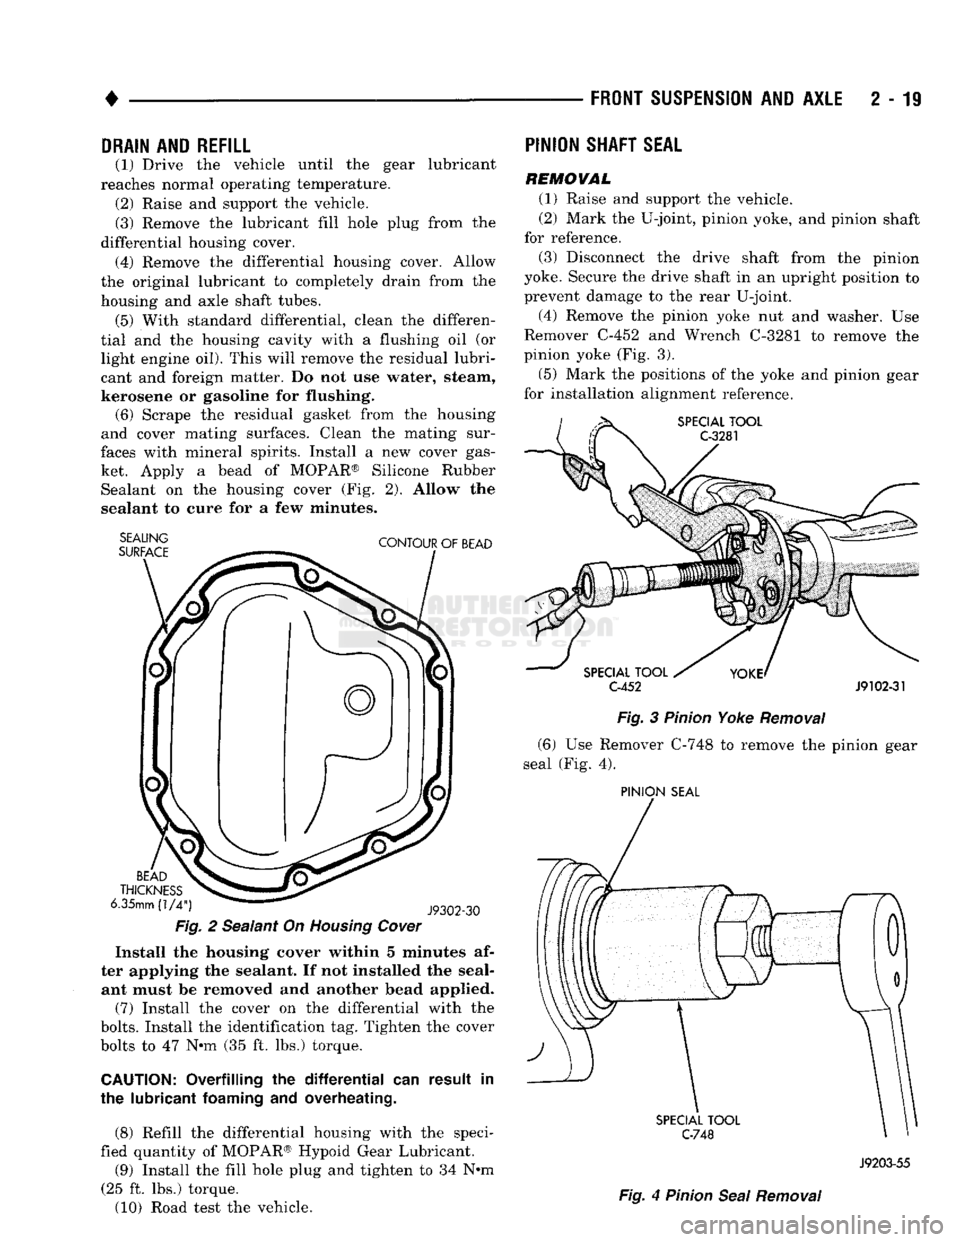 DODGE TRUCK 1993  Service Repair Manual 
FRONT
 SUSPENSION
 AND
 AXLE
 2 - 19 

DRAIN
 AND
 REFILL 

(1) Drive the vehicle until the gear lubricant 
reaches normal operating temperature.  (2) Raise and support the vehicle. 
(3) Remove the l